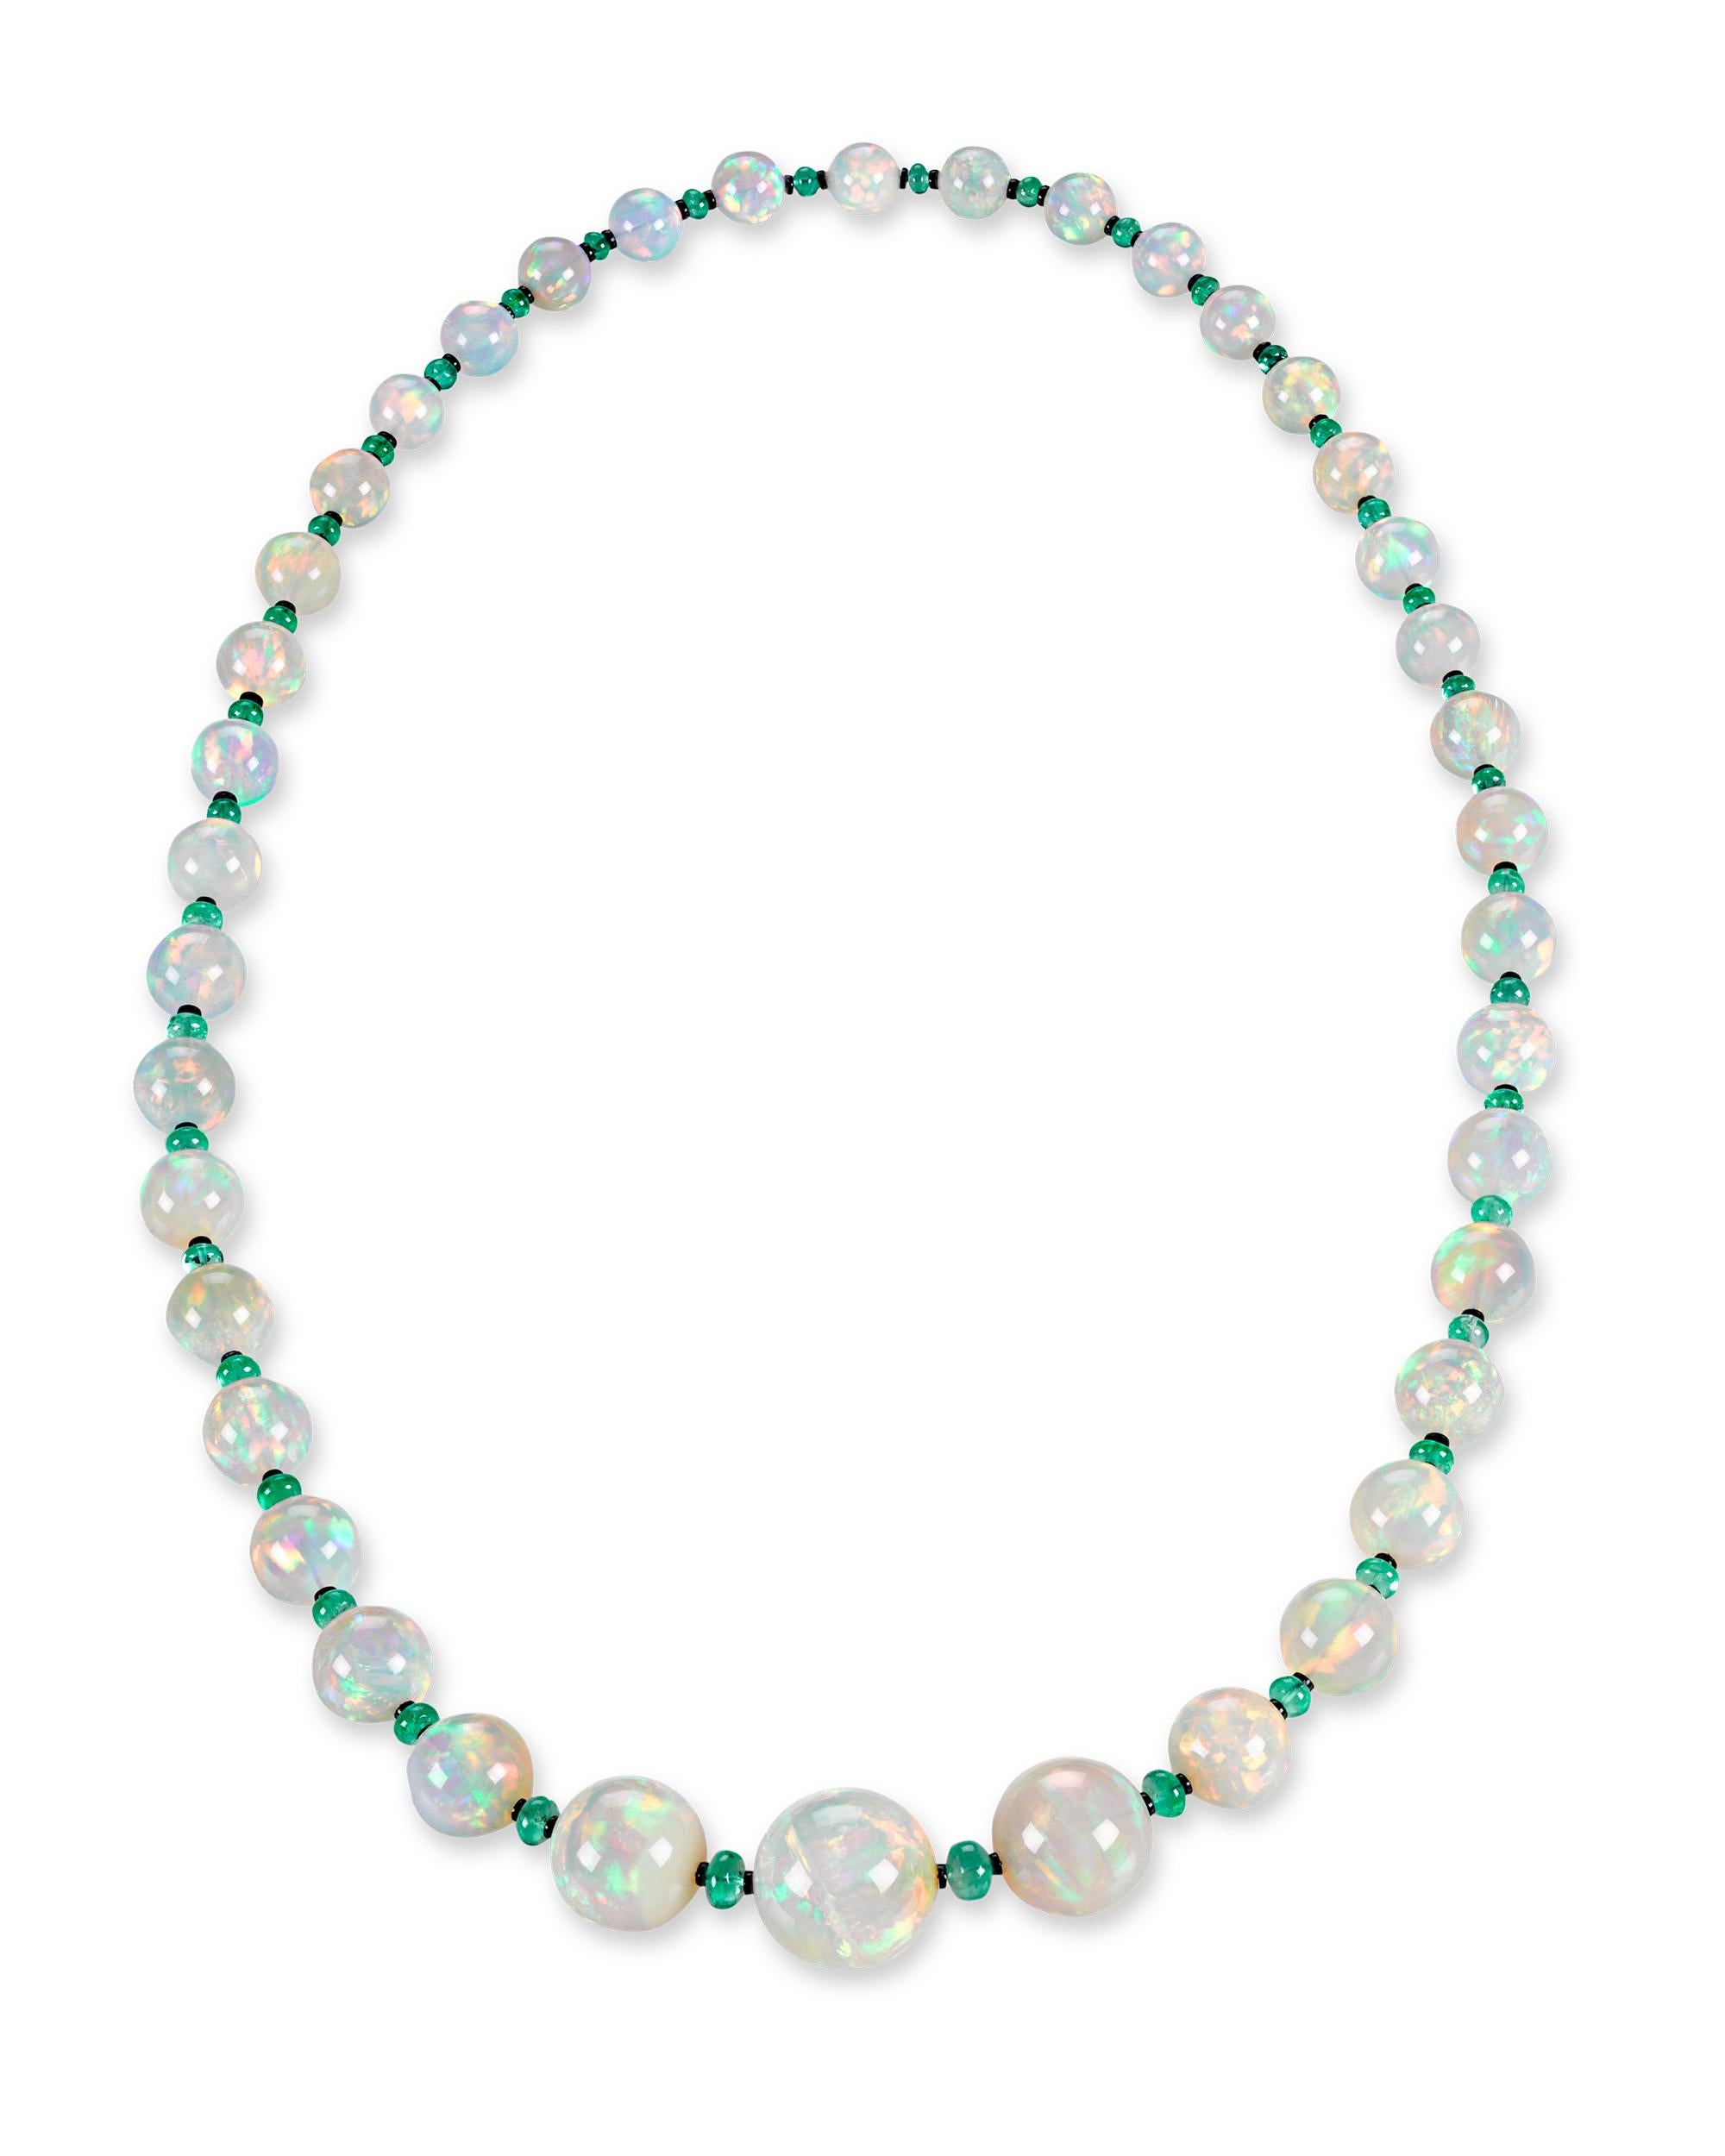 Forty monumental Ethiopian opal beads totaling 490.80 carats comprise this mesmerizing necklace. The graduated gems are not only impressive in size, but each exhibits a high level of translucence and extraordinary play of color. Opals are not cut